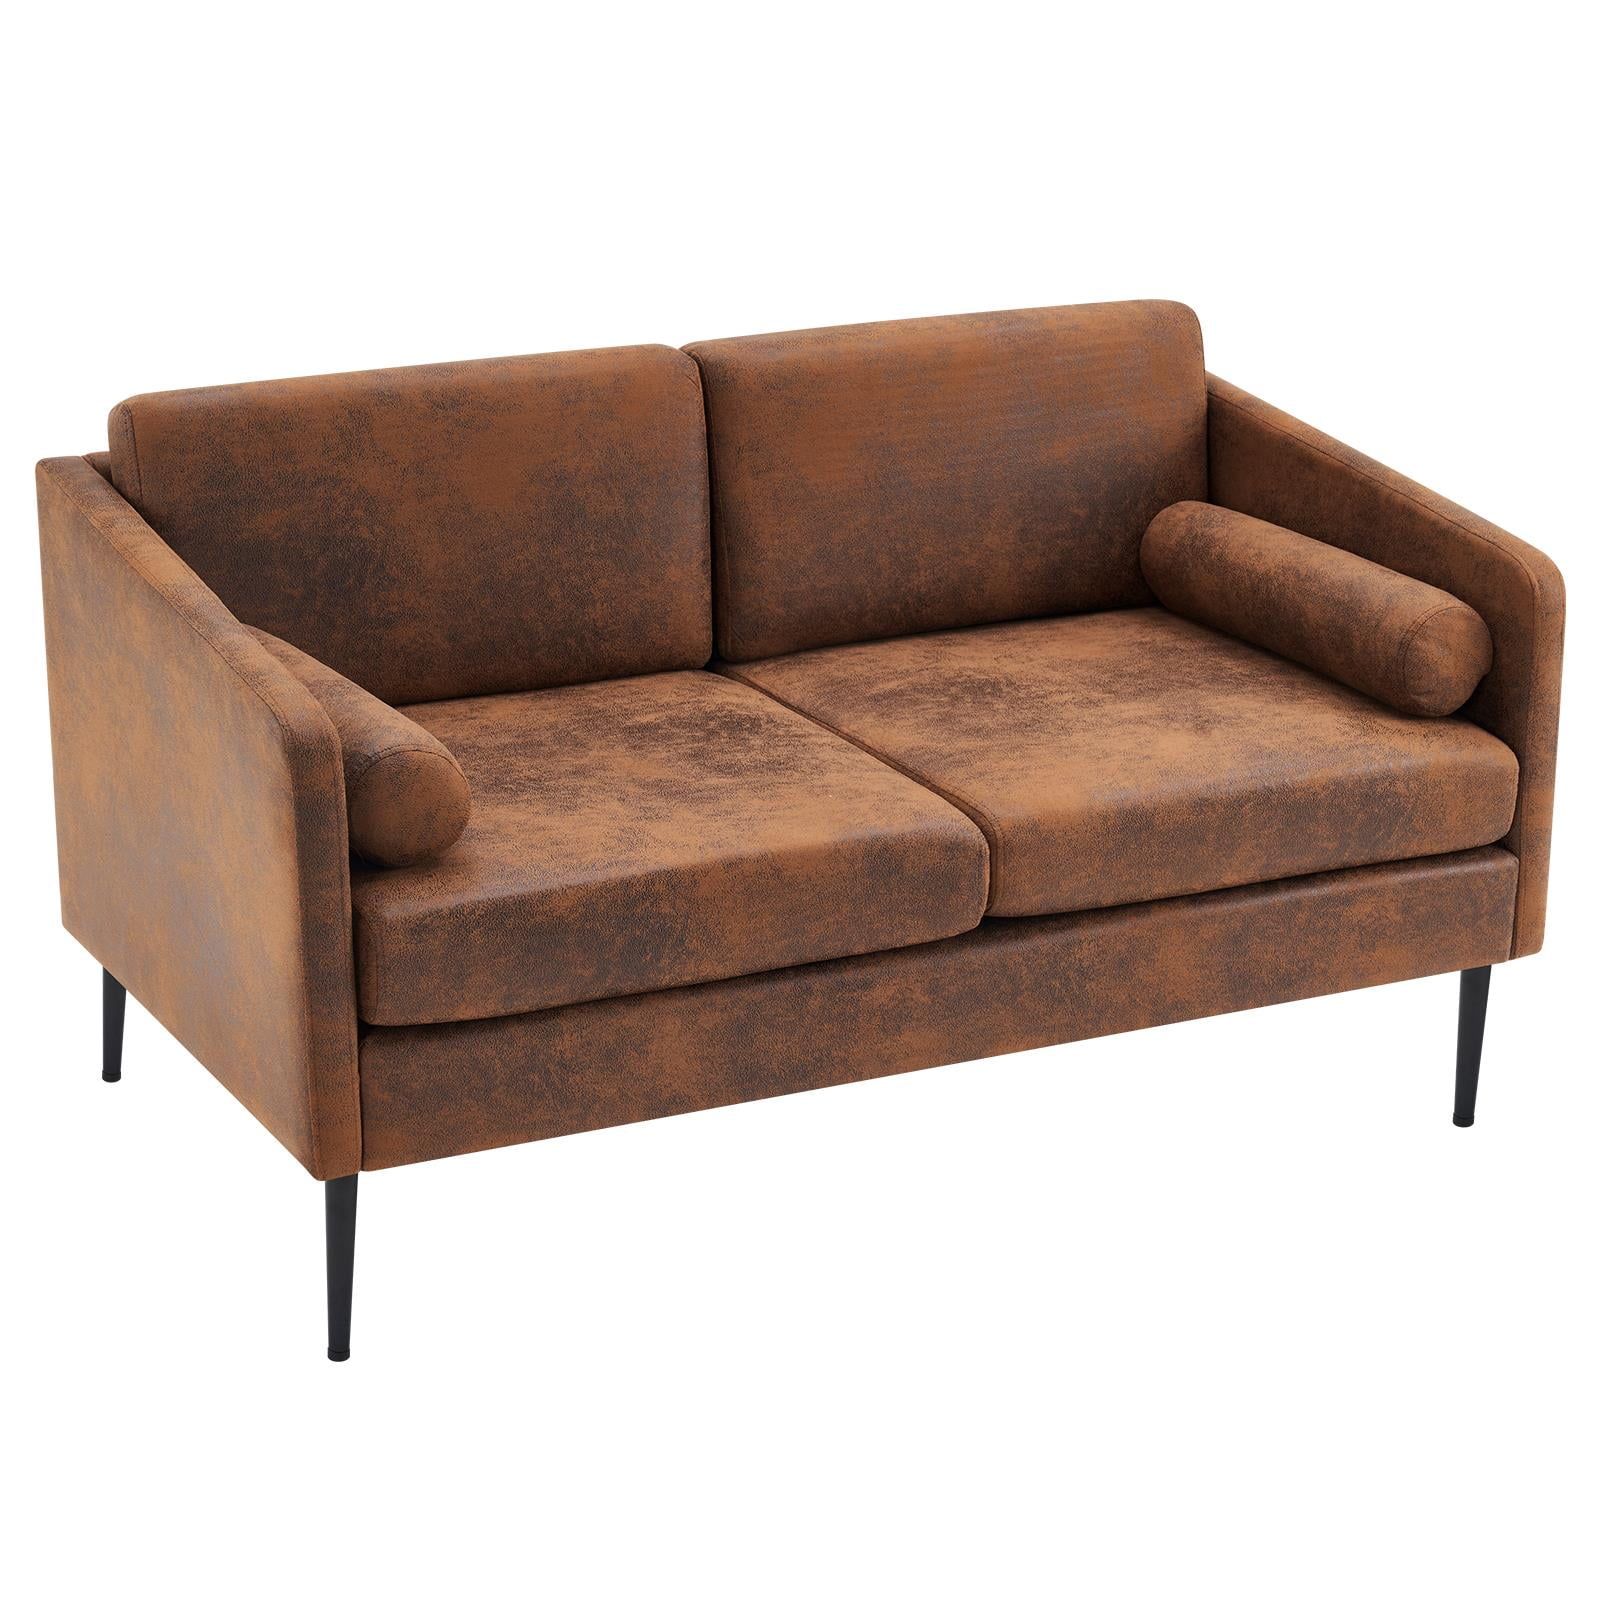 Ktaxon 52'' Small Modern Loveseat, Mid-Century Bronzing Cloth 2-Seat Love  Seat Sofa Chair Furniture for Living Room, Apartment and Small Space Brown  